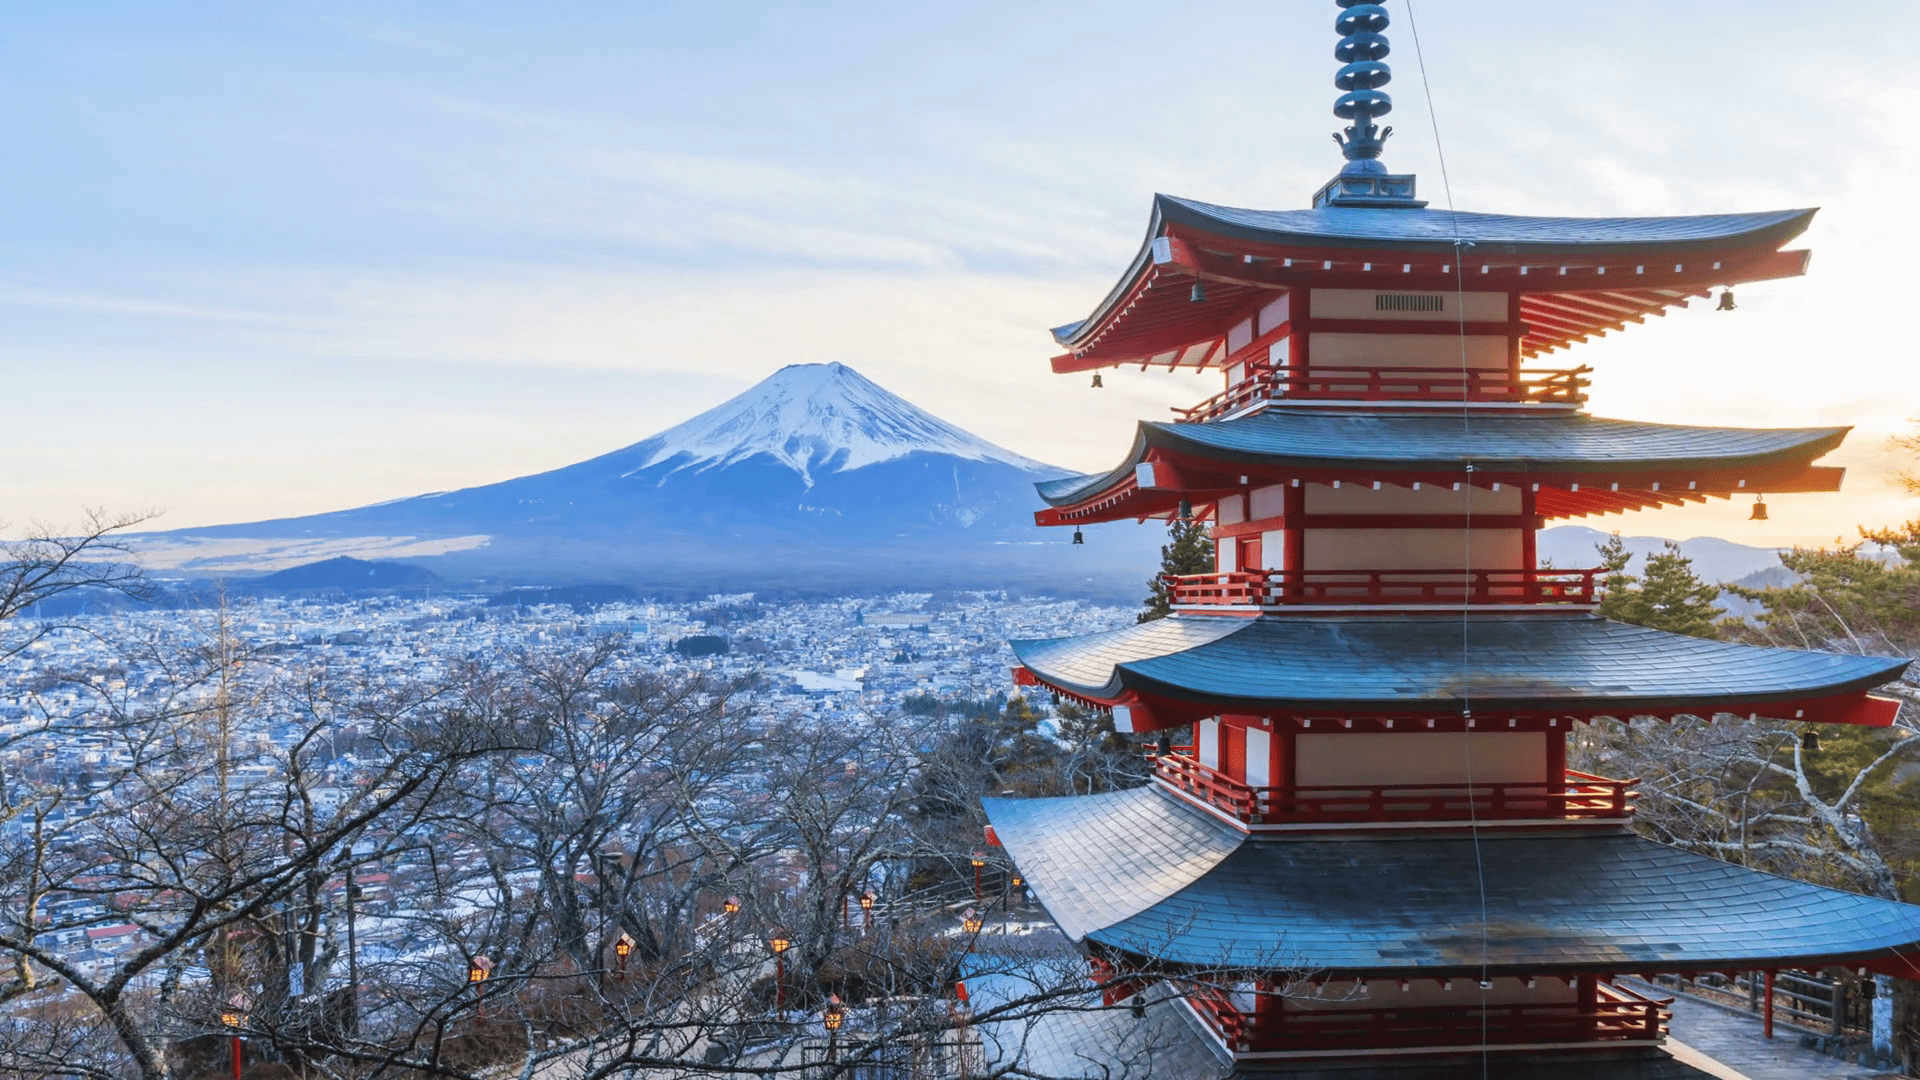 4K Timelapse of Mt. Fuji with Chureito Pagoda at sunset in winter